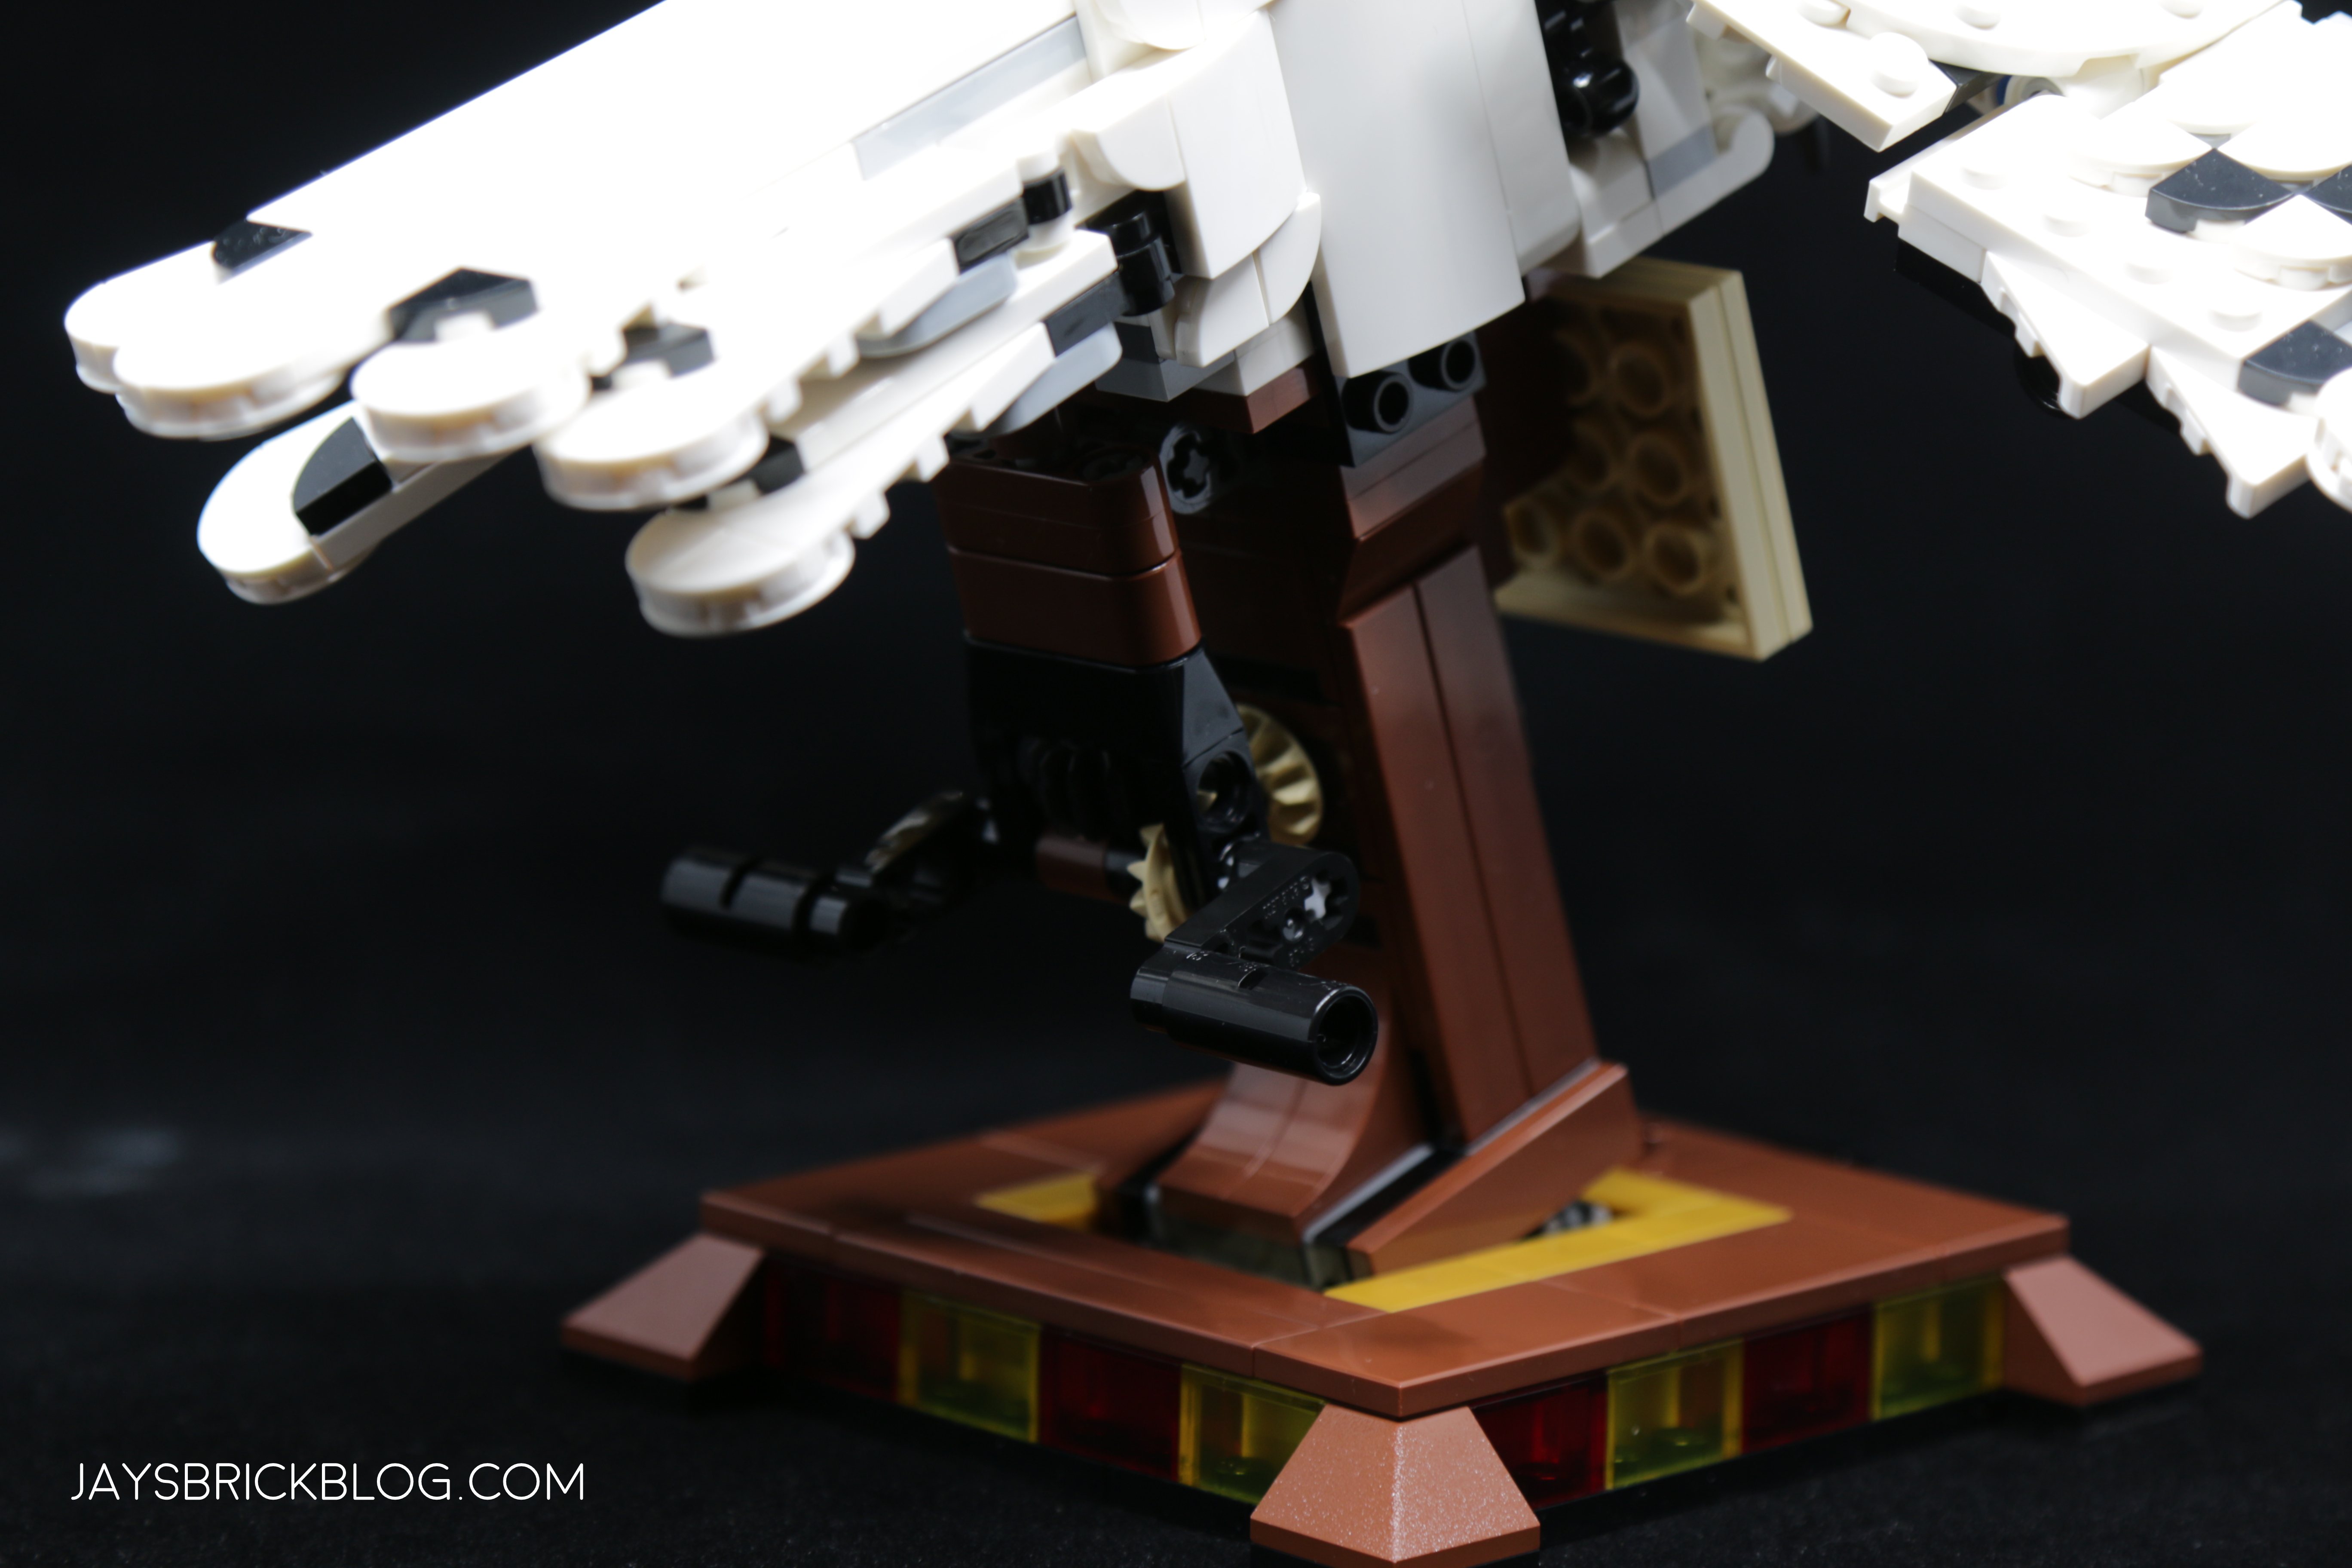 Review: 75979-1 - Hedwig  Rebrickable - Build with LEGO